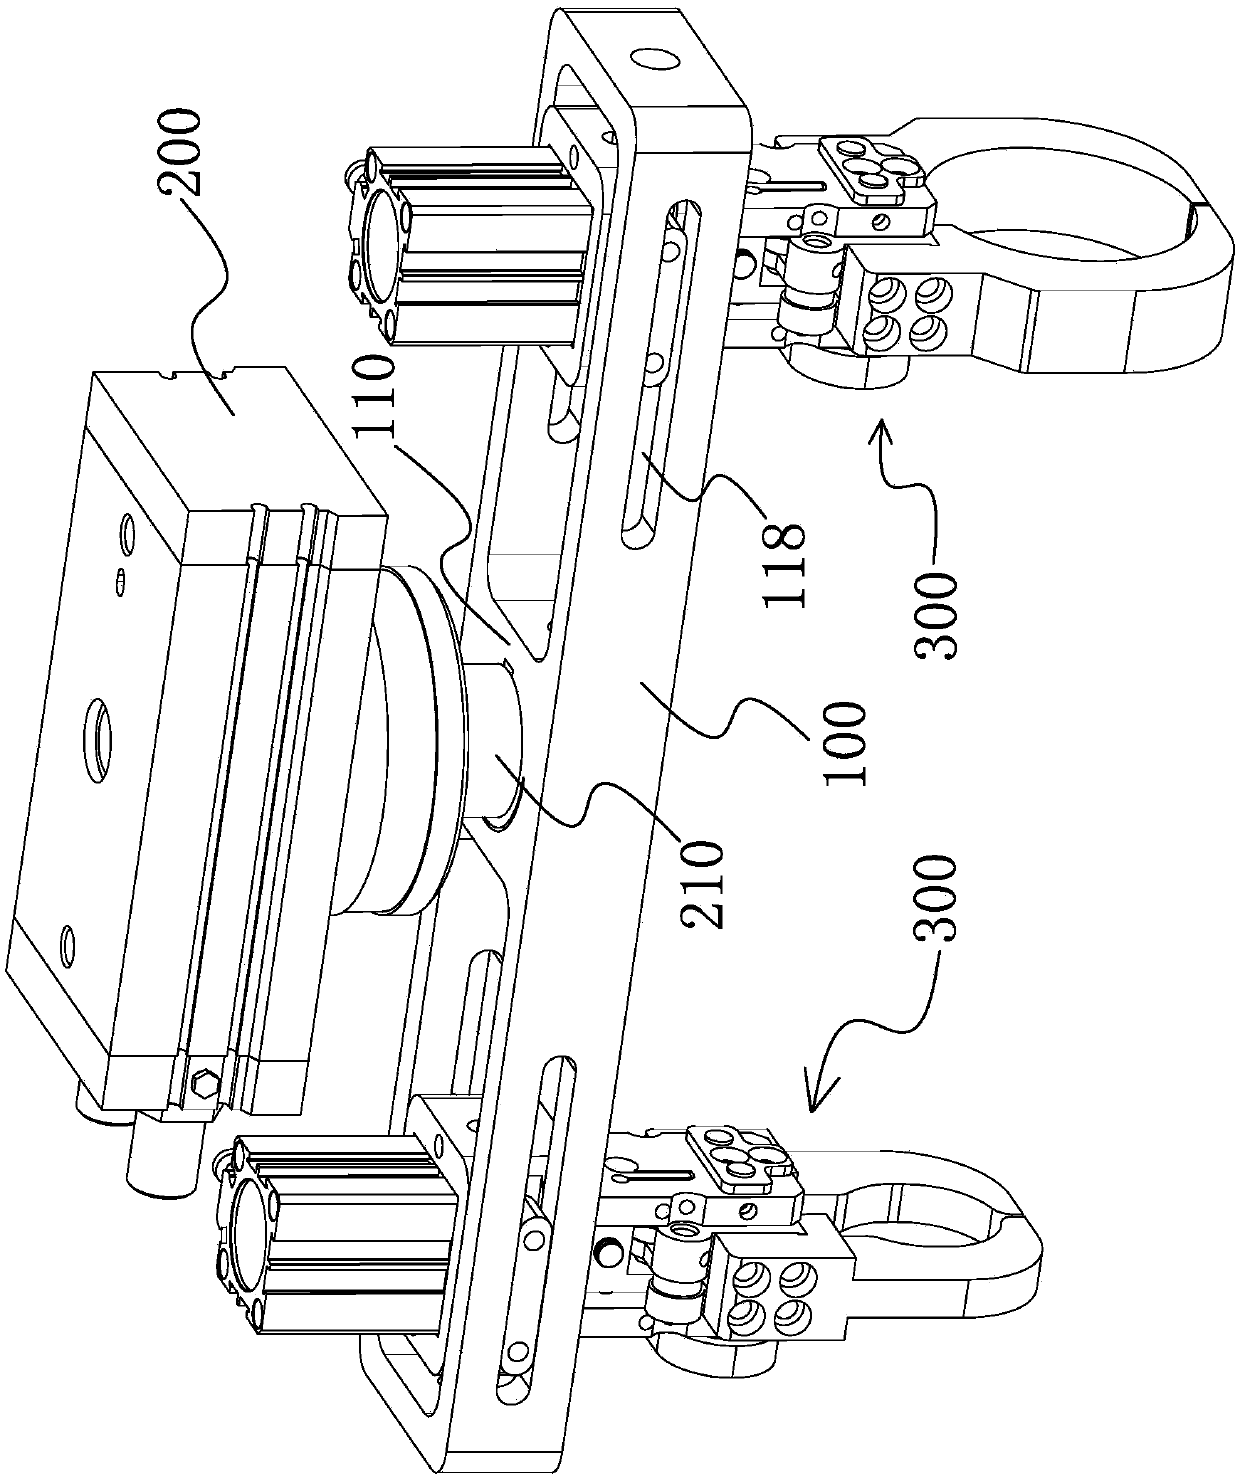 Rotatable mechanical gripper device